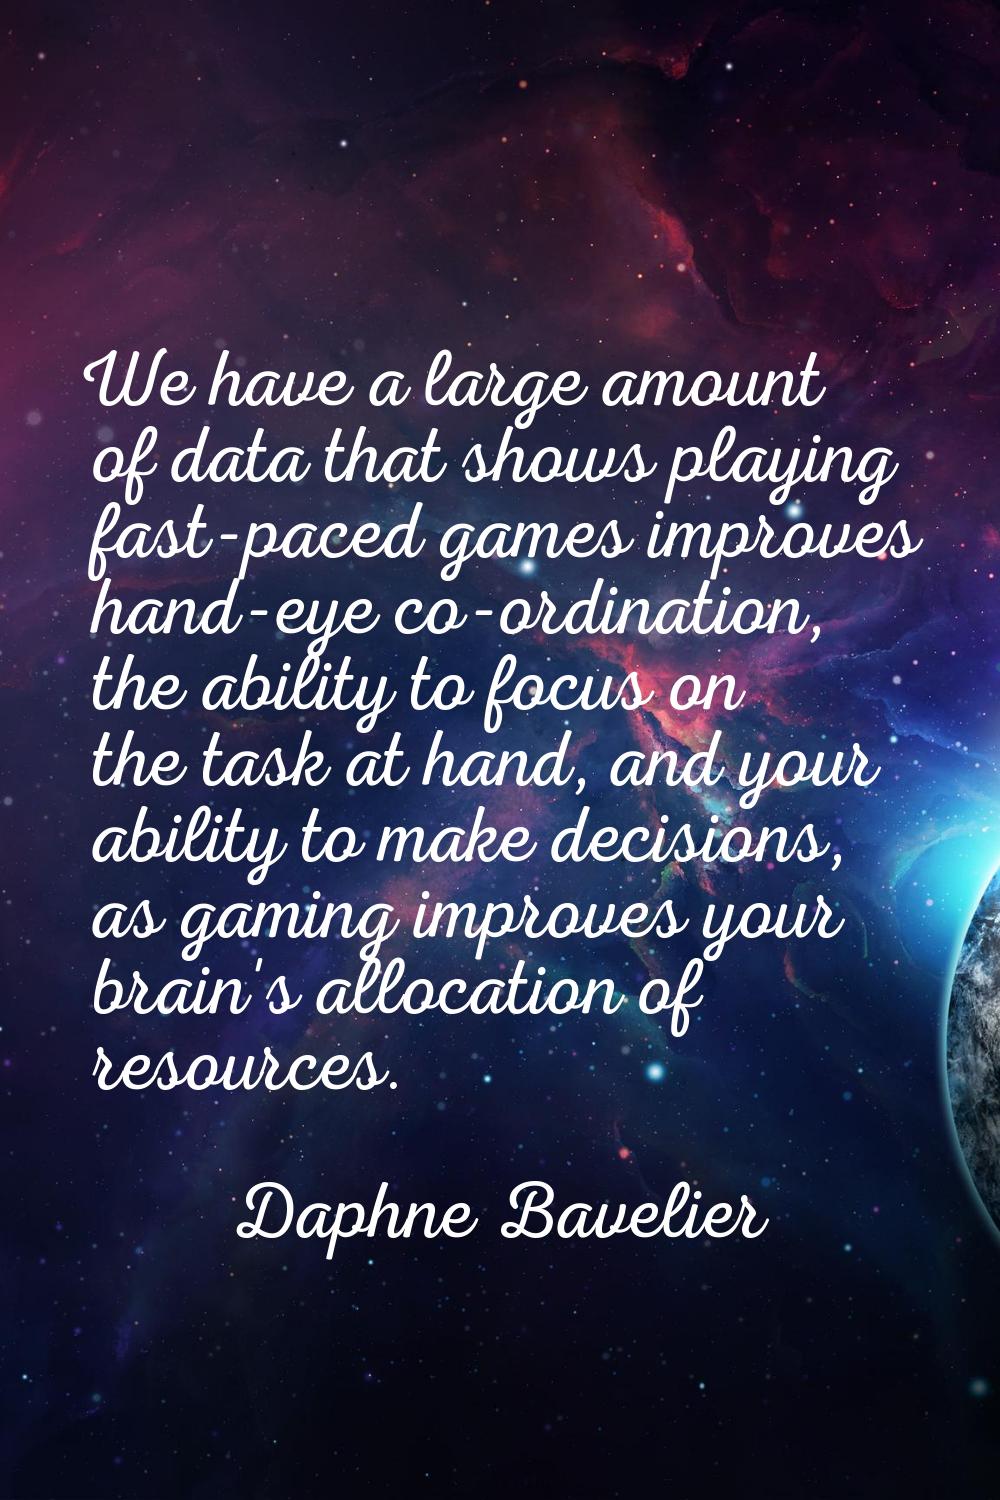 We have a large amount of data that shows playing fast-paced games improves hand-eye co-ordination,